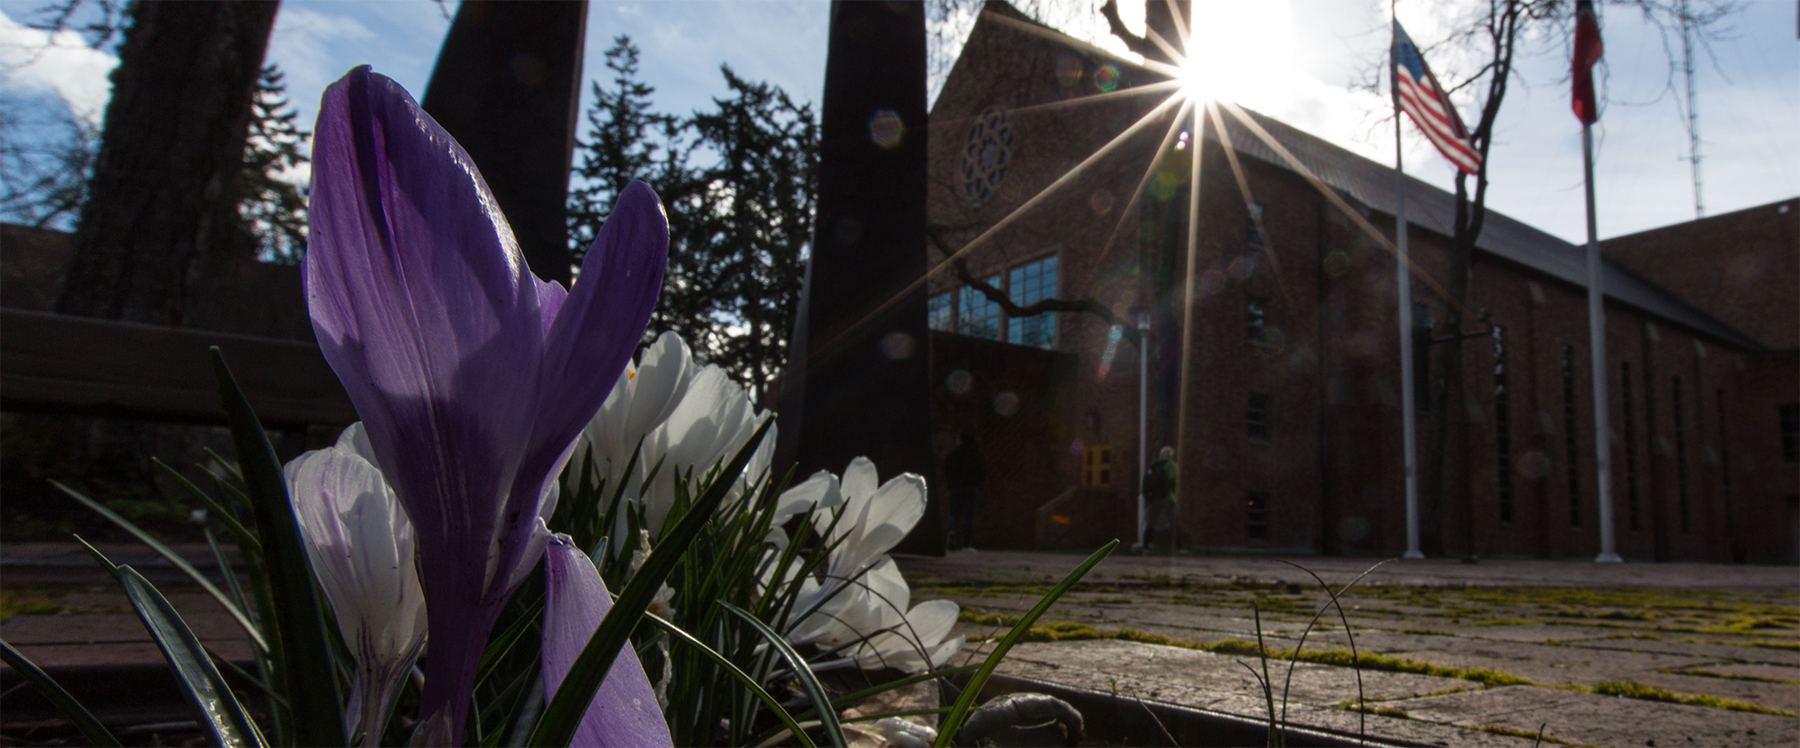 Mary Hille Phillips Center for the Performing Arts with crocus blooming